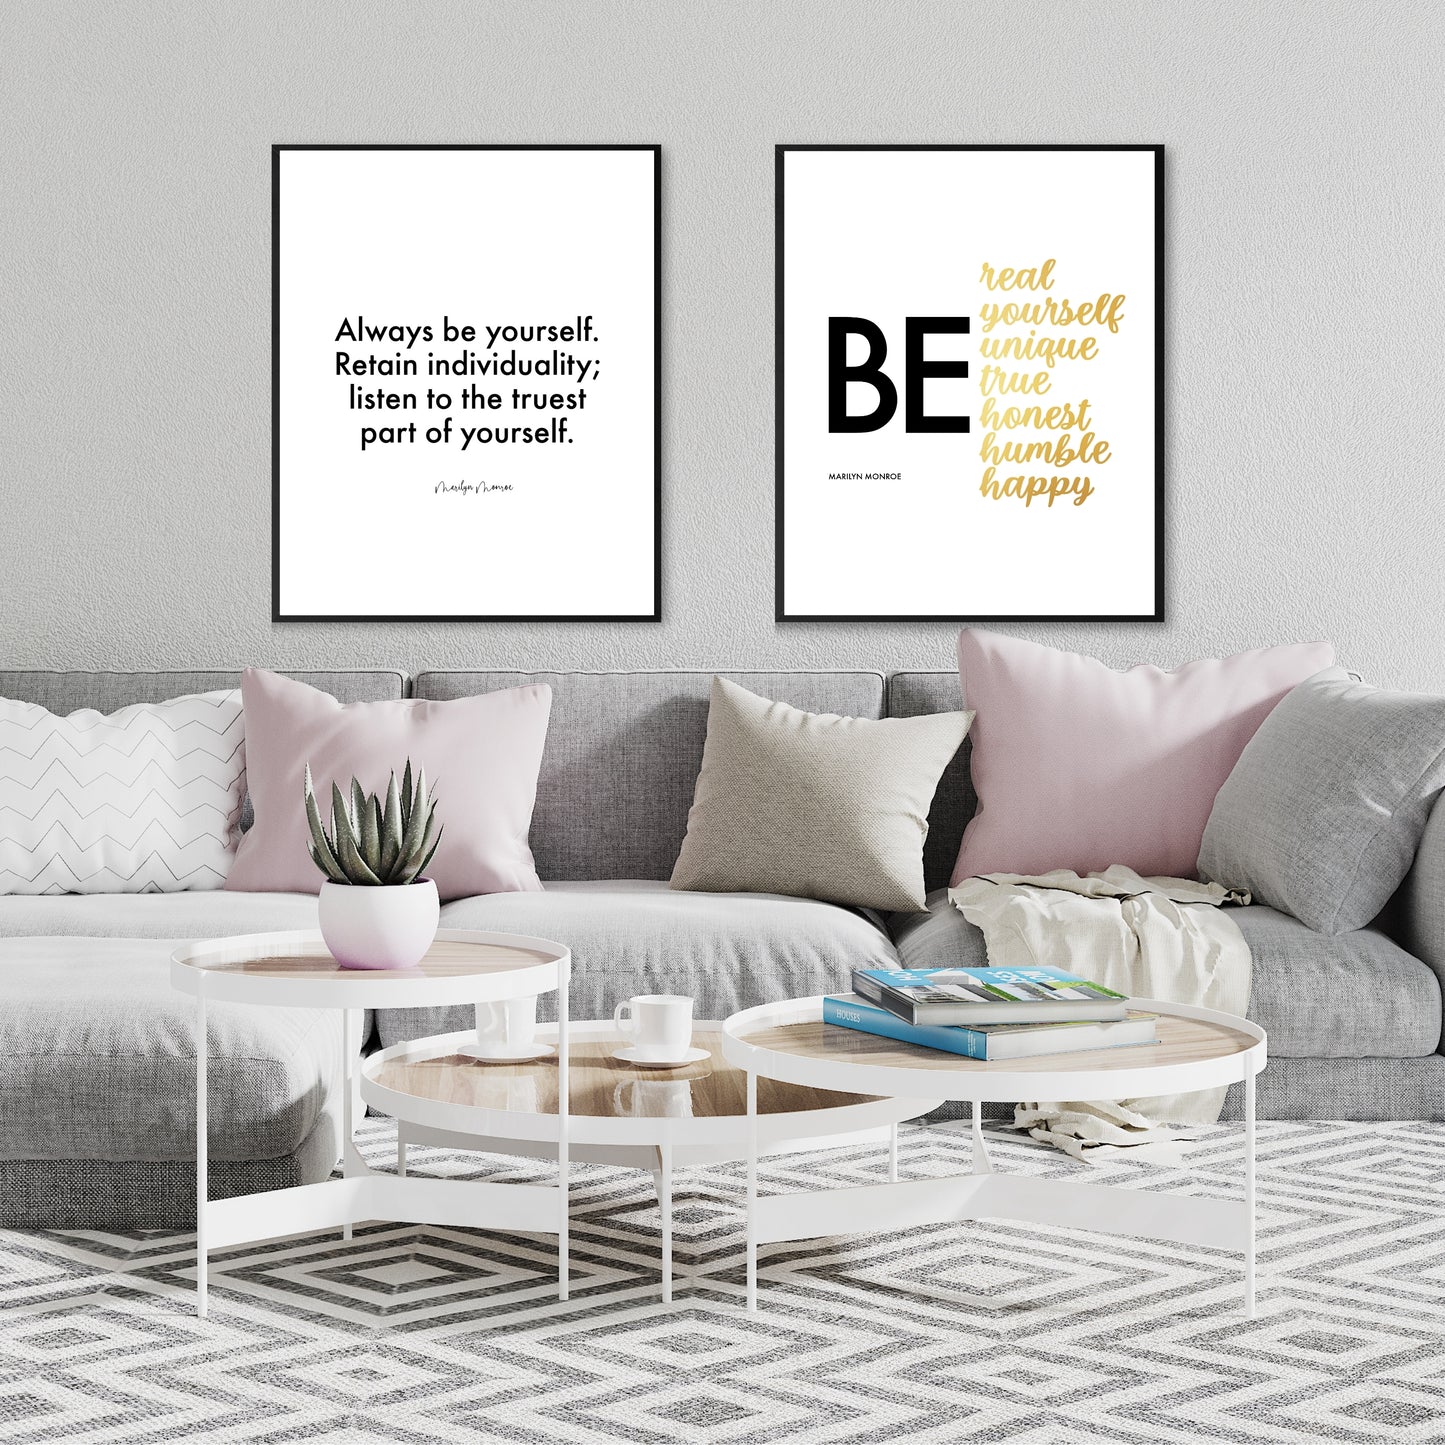 "Be..." Famous Quote by Marilyn Monroe In Gold, Printable Art